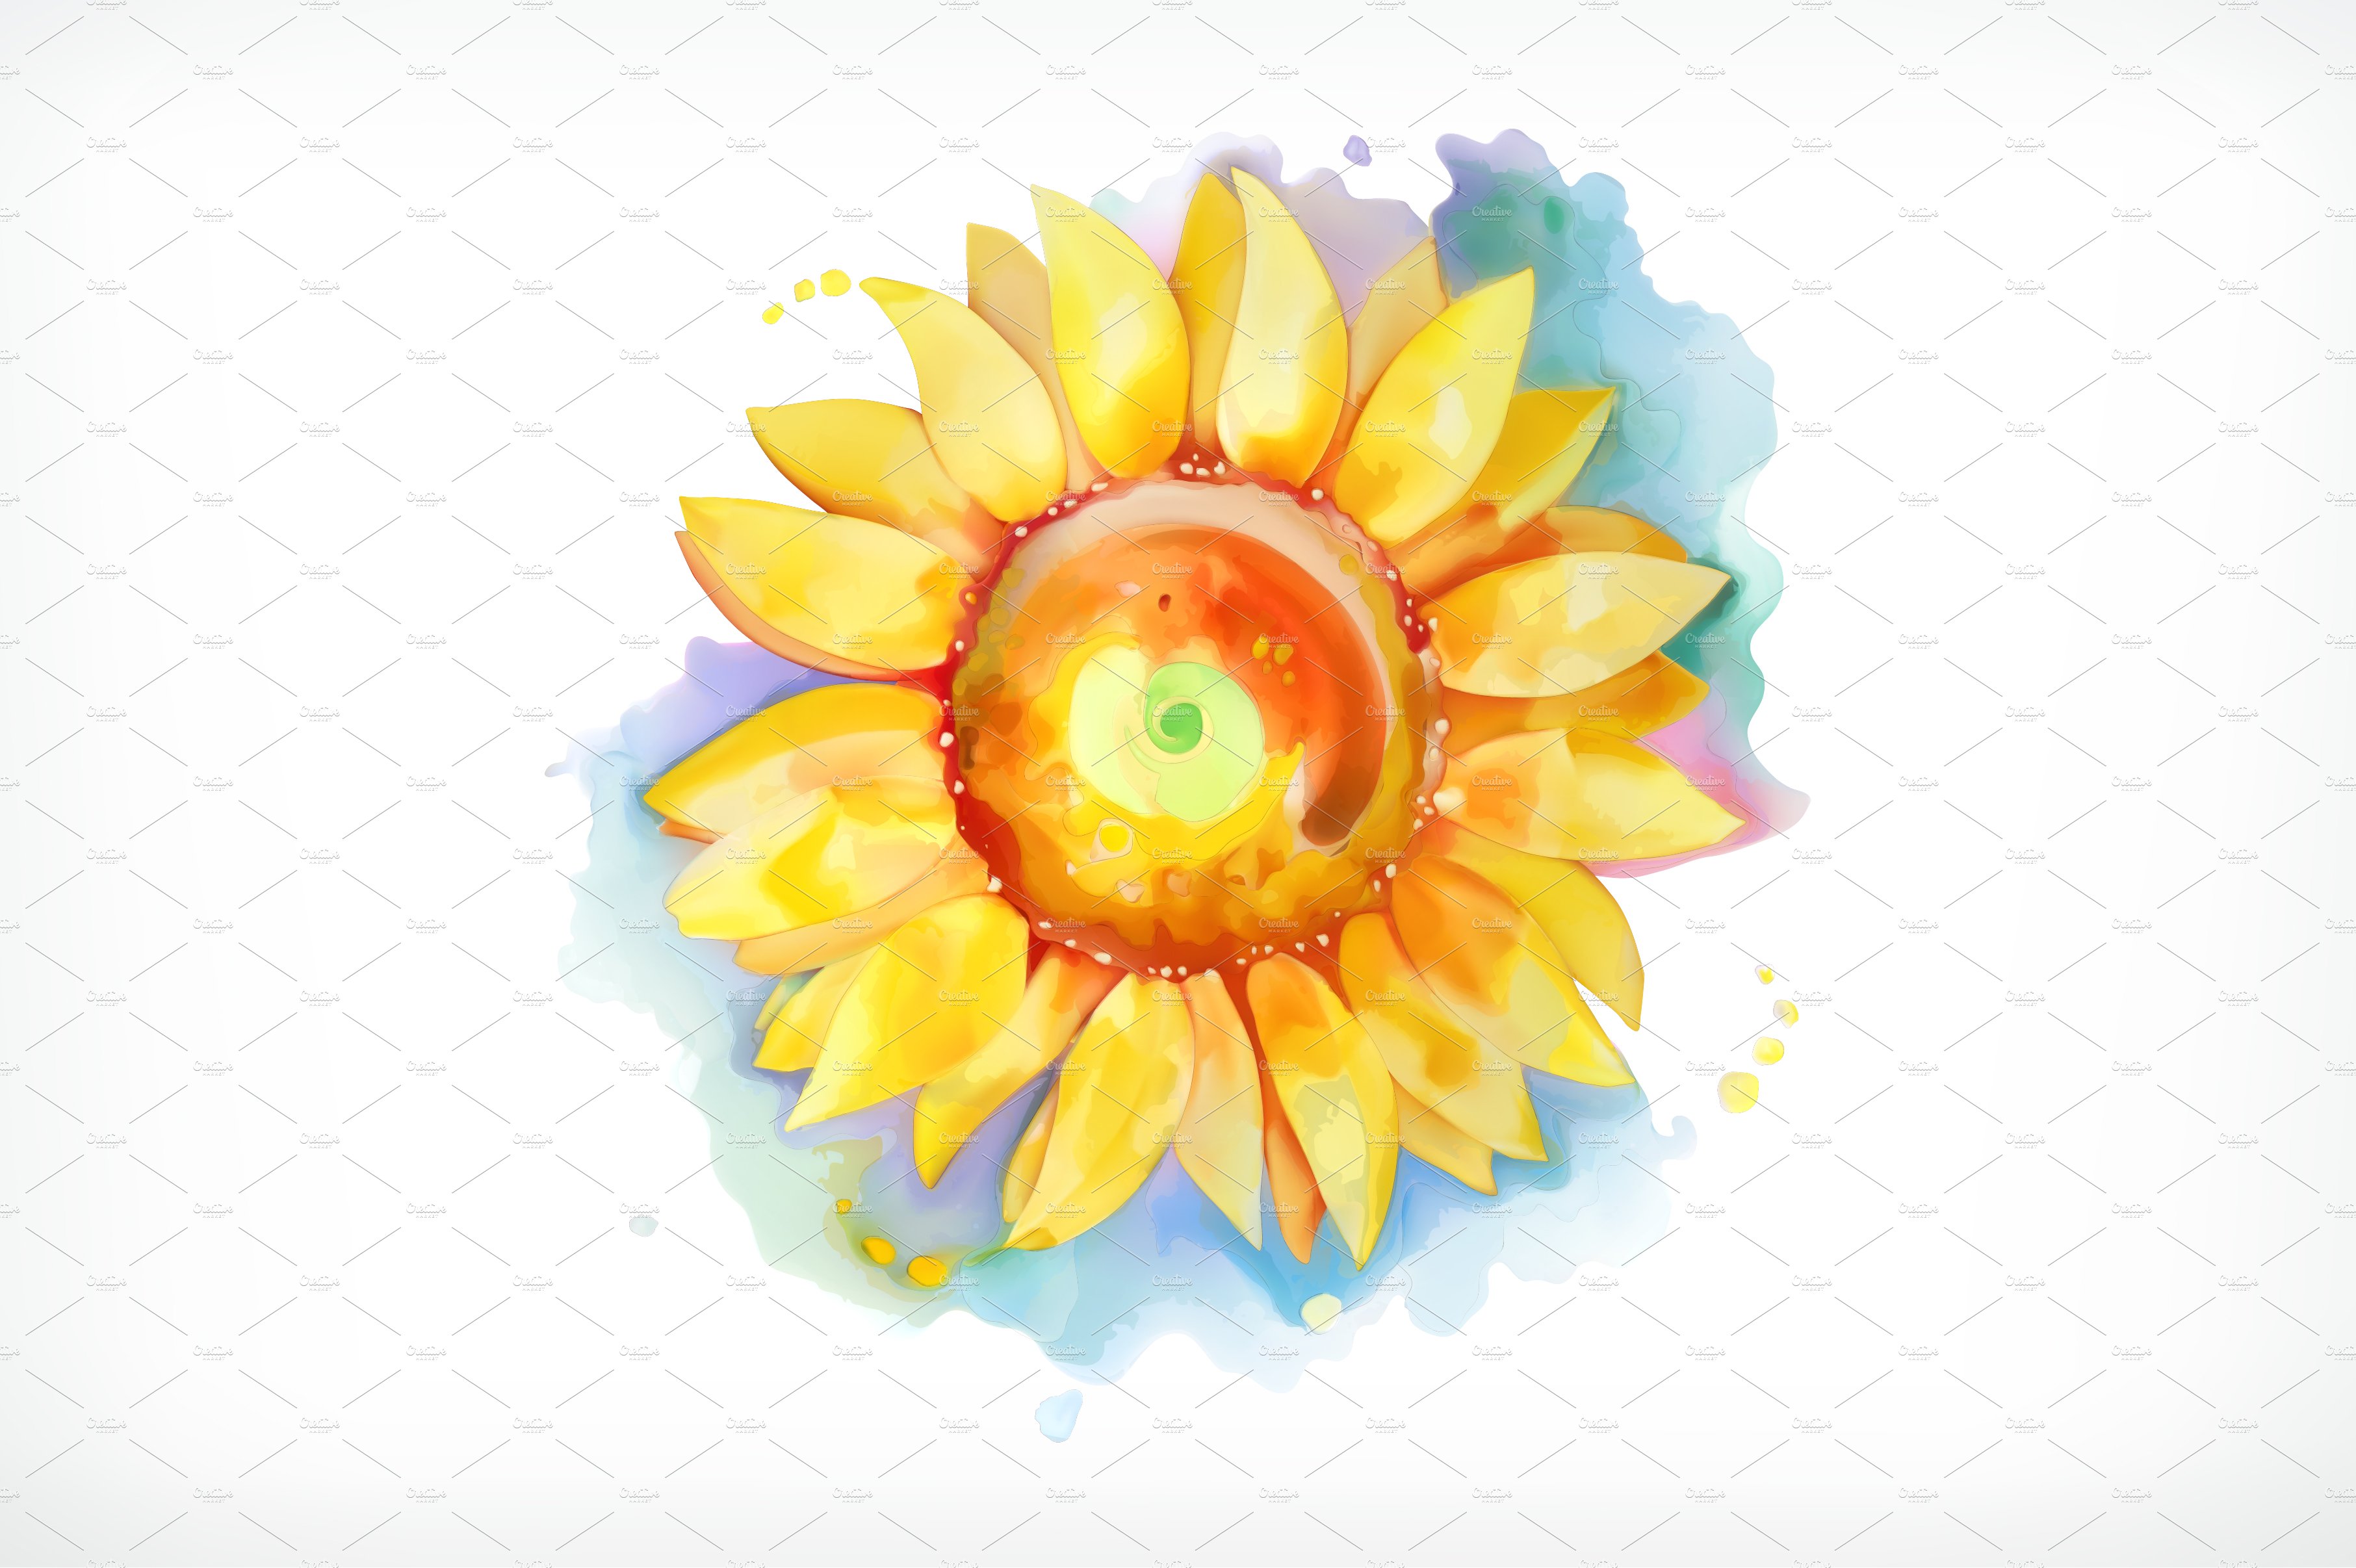 Sunflower watercolor painting vector cover image.